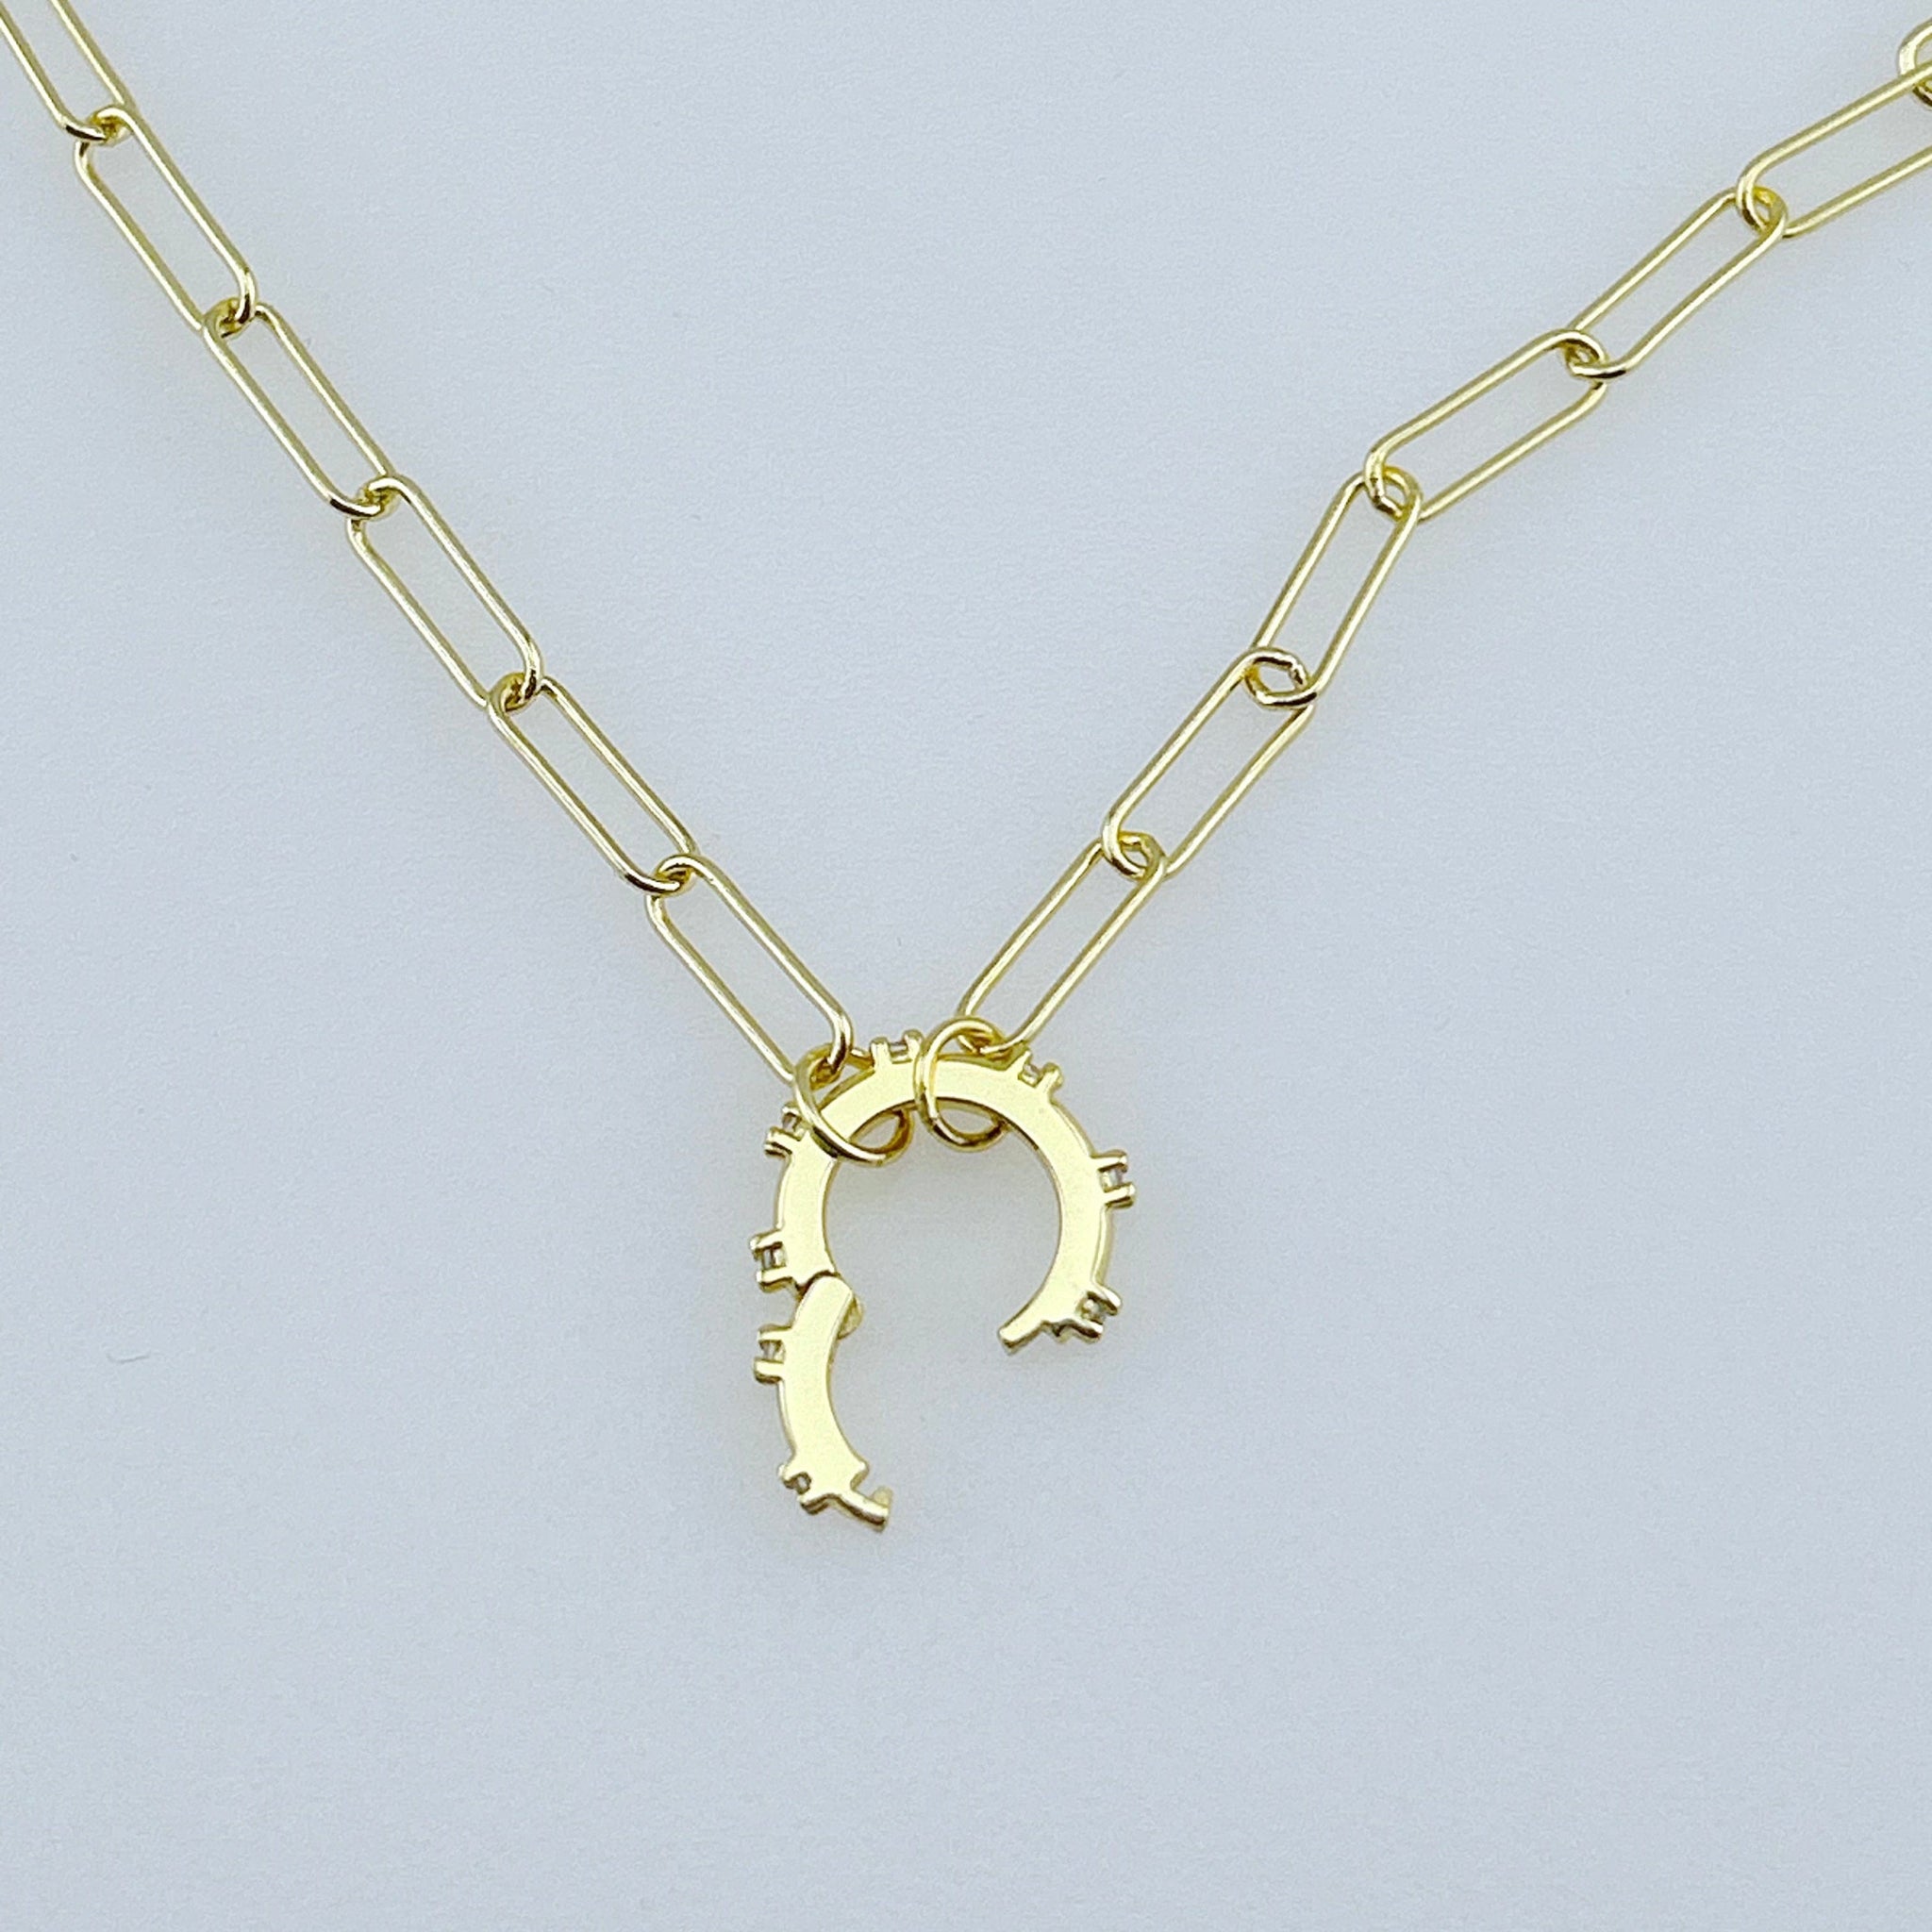 Picture of a gold paper clip chain with a circular center connector that is open to show how you can open it to add a charm